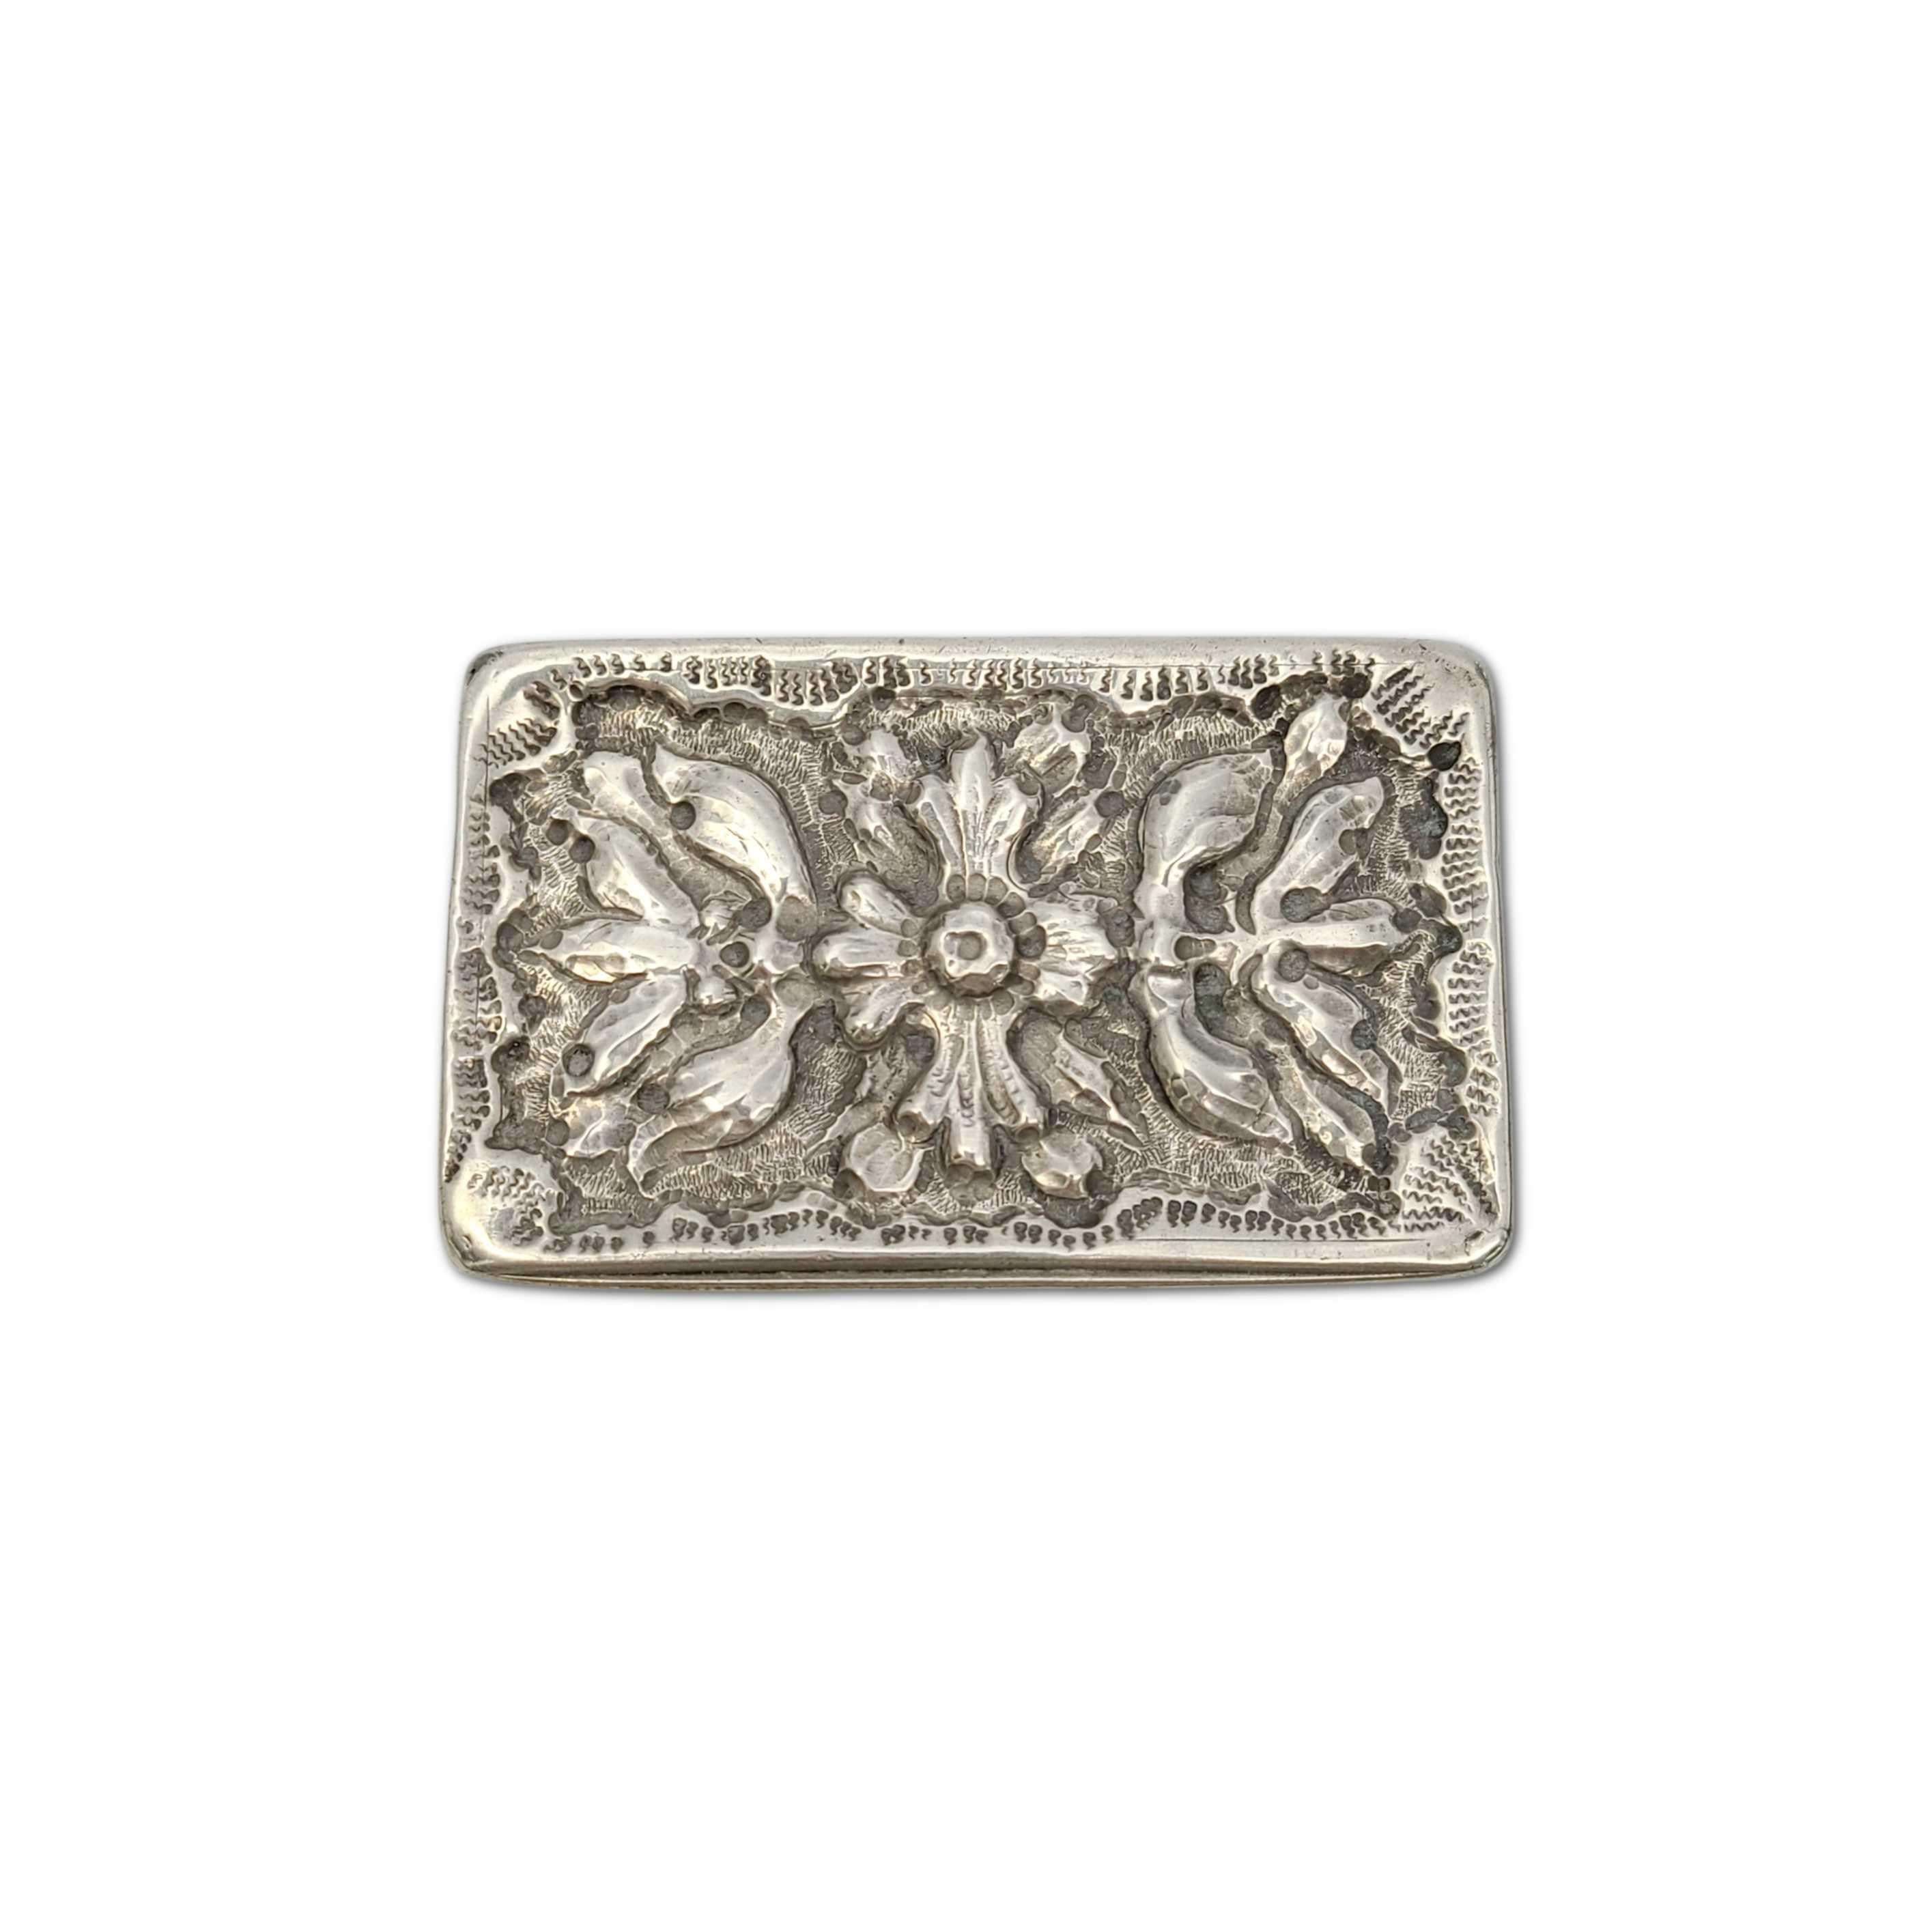 Antique small sterling silver box.

Small, rectangular sterling silver box with repousse flower design on the lid, stamped and etched designs around the box, and a polished smooth bottom.

Measures: approx 3